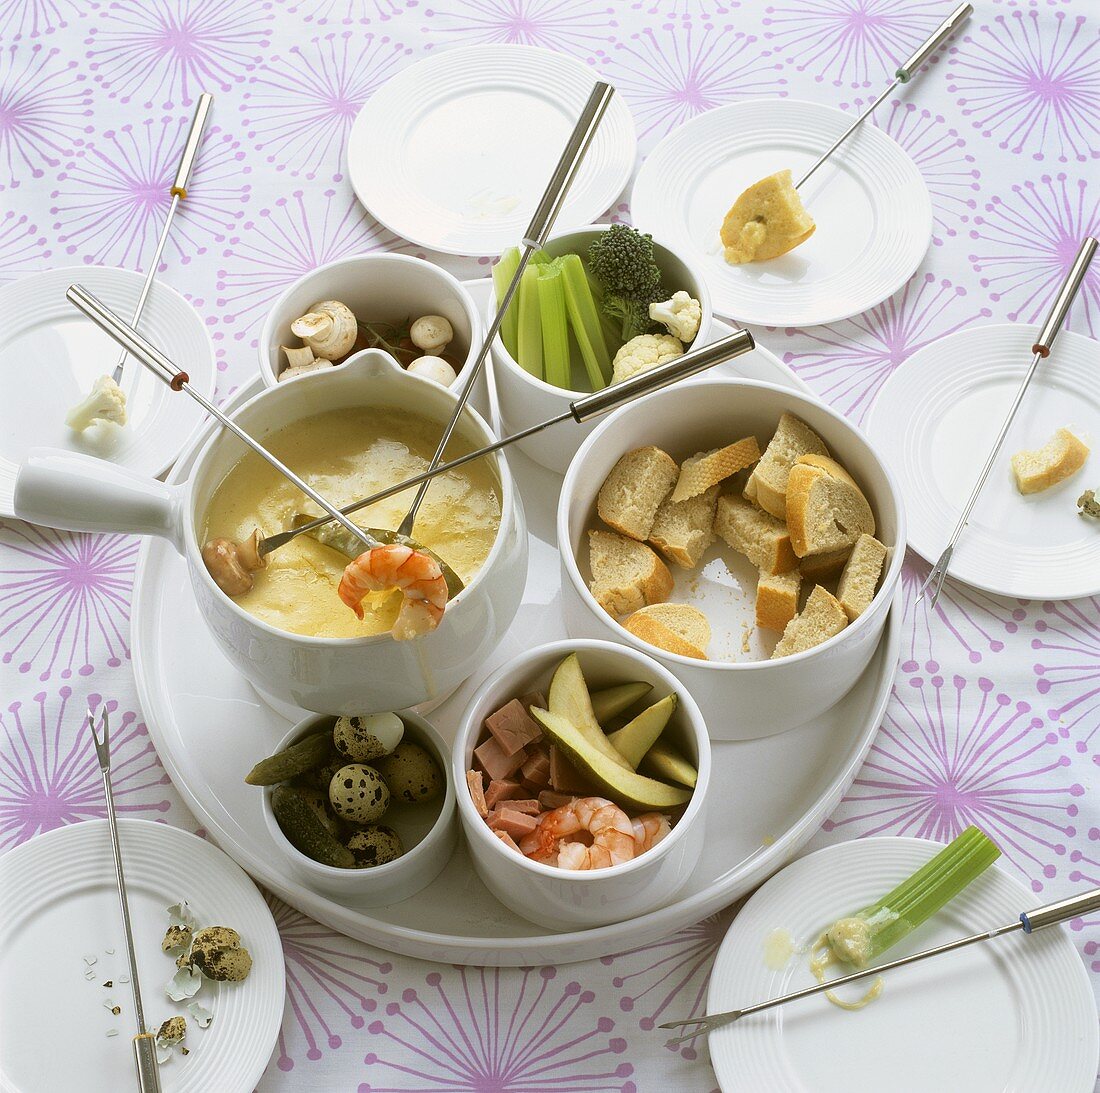 Cheese fondue with vegetables, prawns and bread cubes